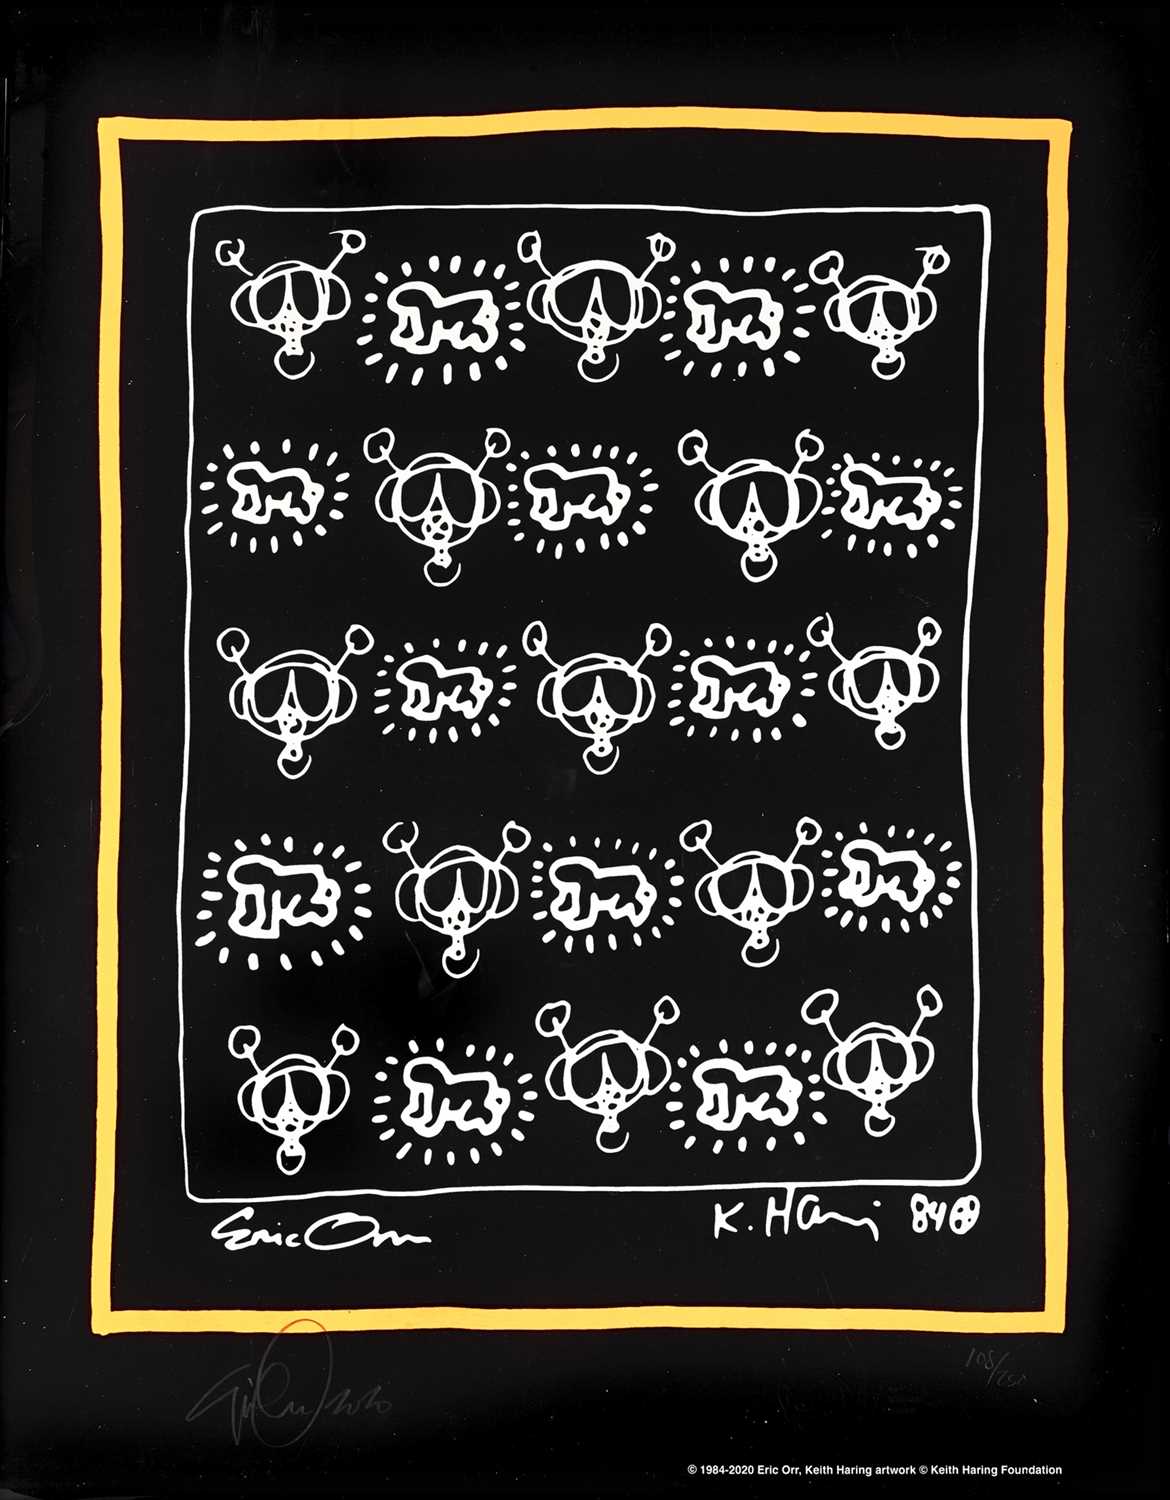 Lot 91 - Keith Haring & Eric Orr (Collaboration), 'Repeat', 2020